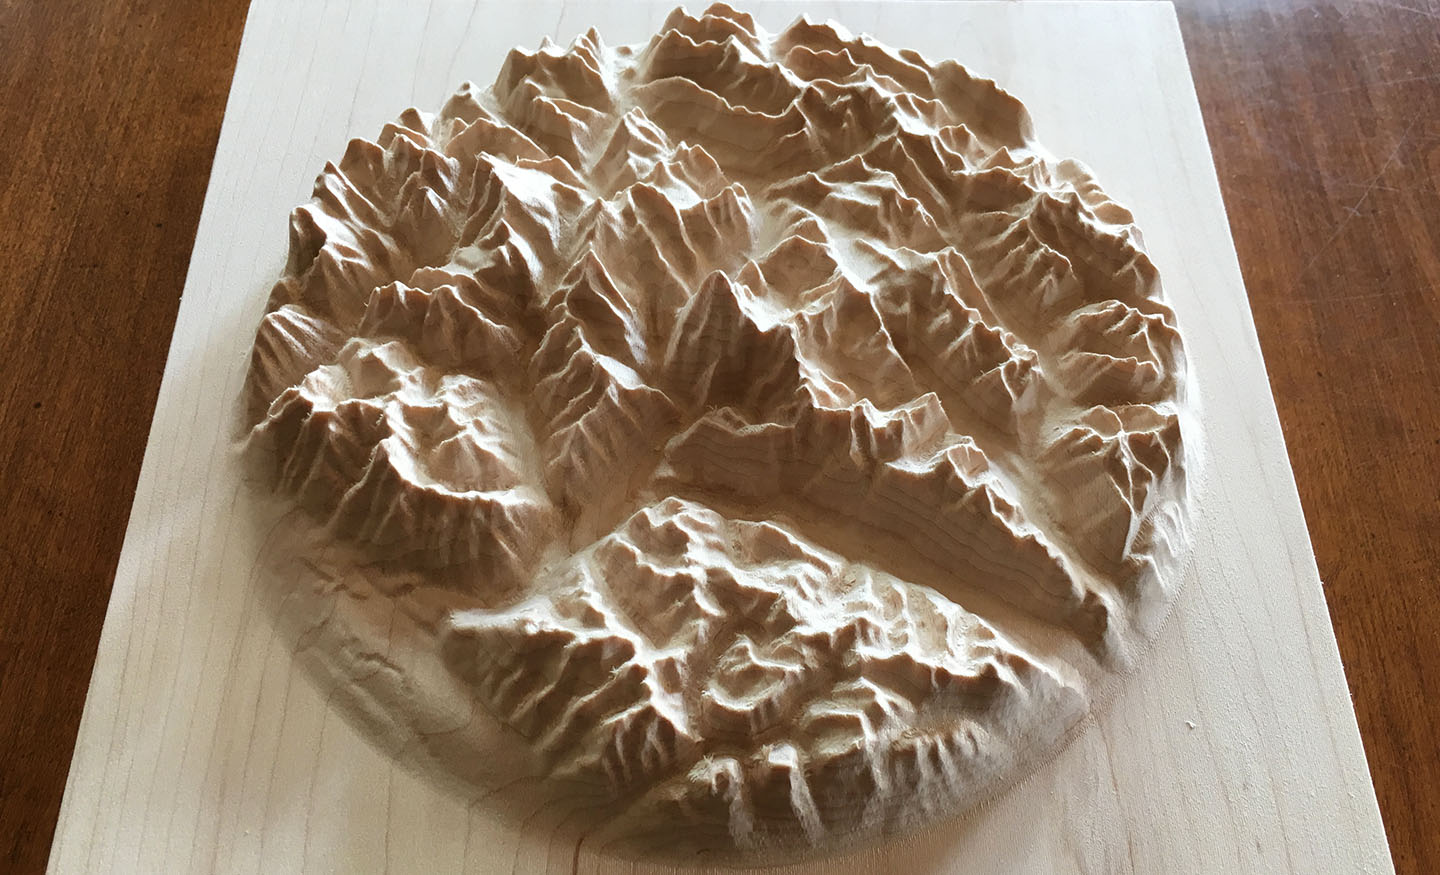 three-dimensional wood-carved relief map of the Canadian Rockies around Mount Robson, British Columbia, Canada